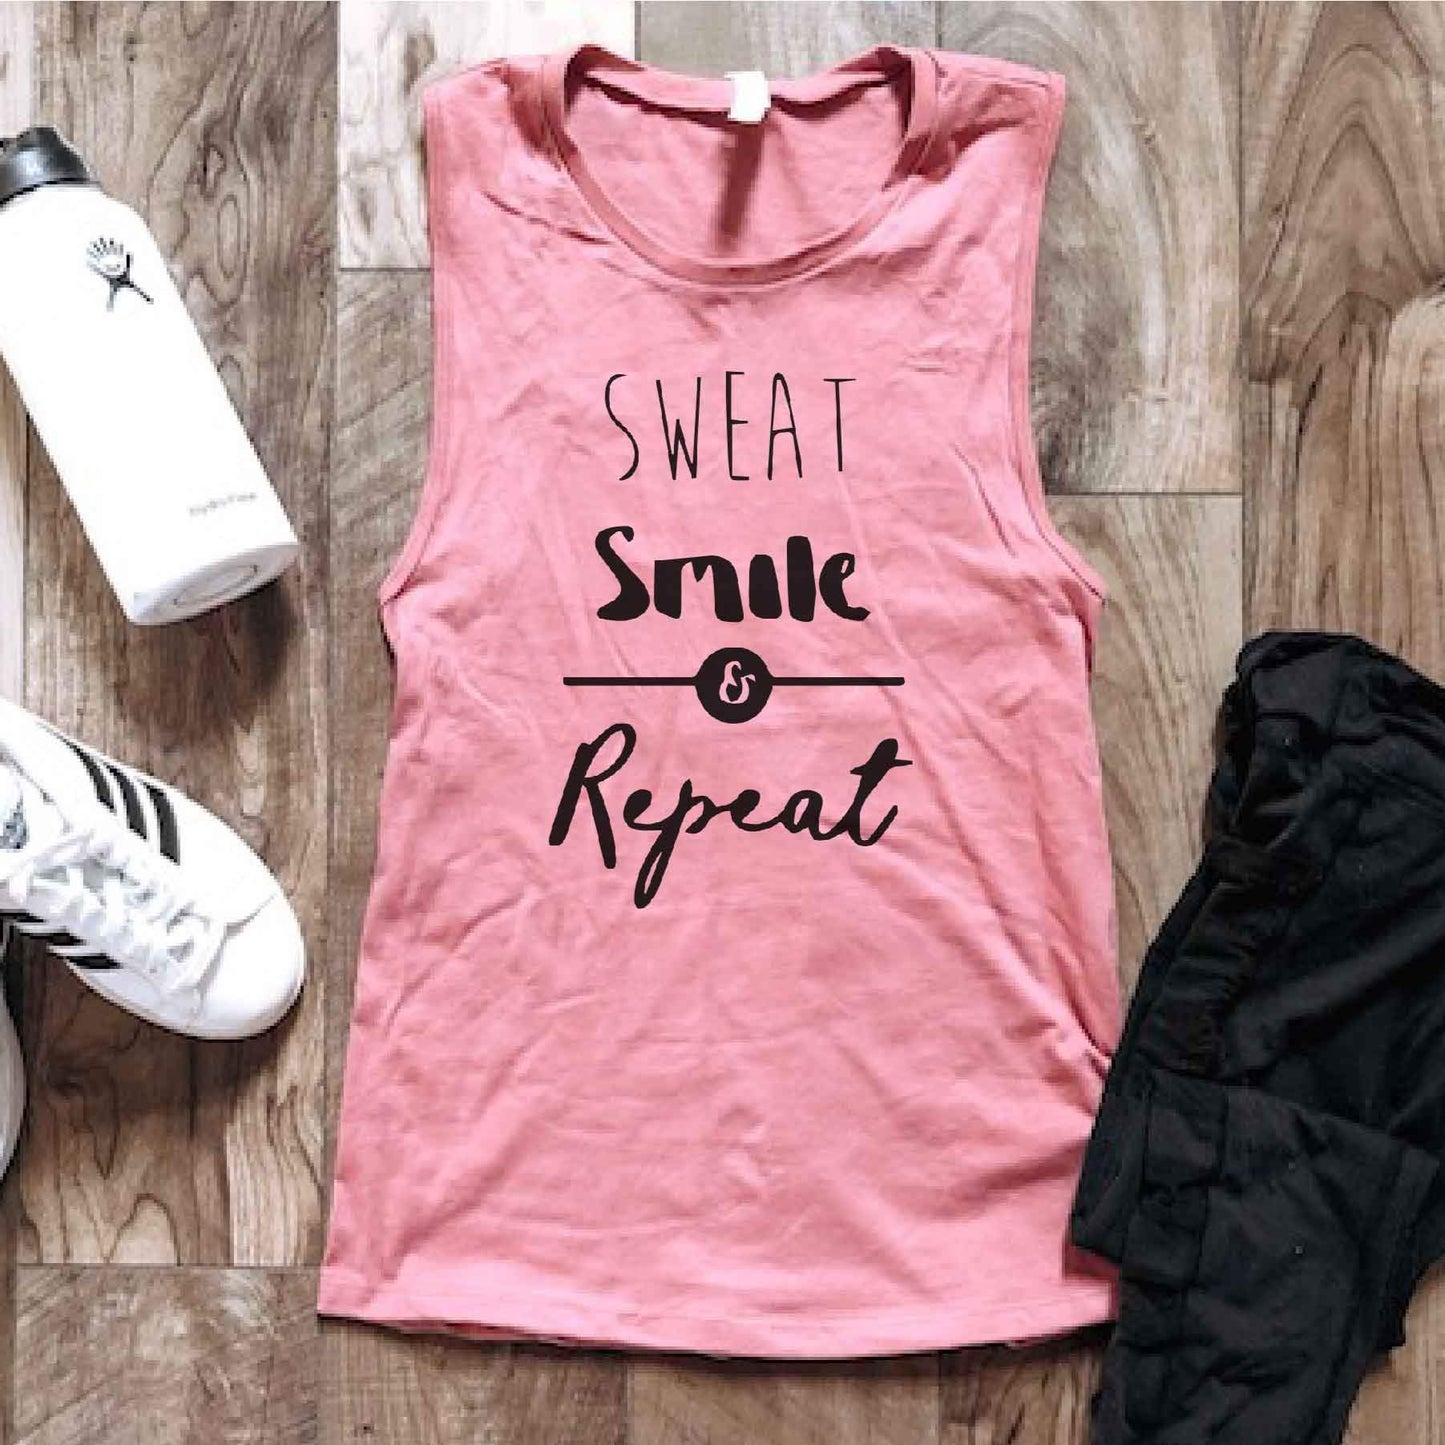 Sweat, Smile, Repeat Pink Muscle Tank [will ship separately]